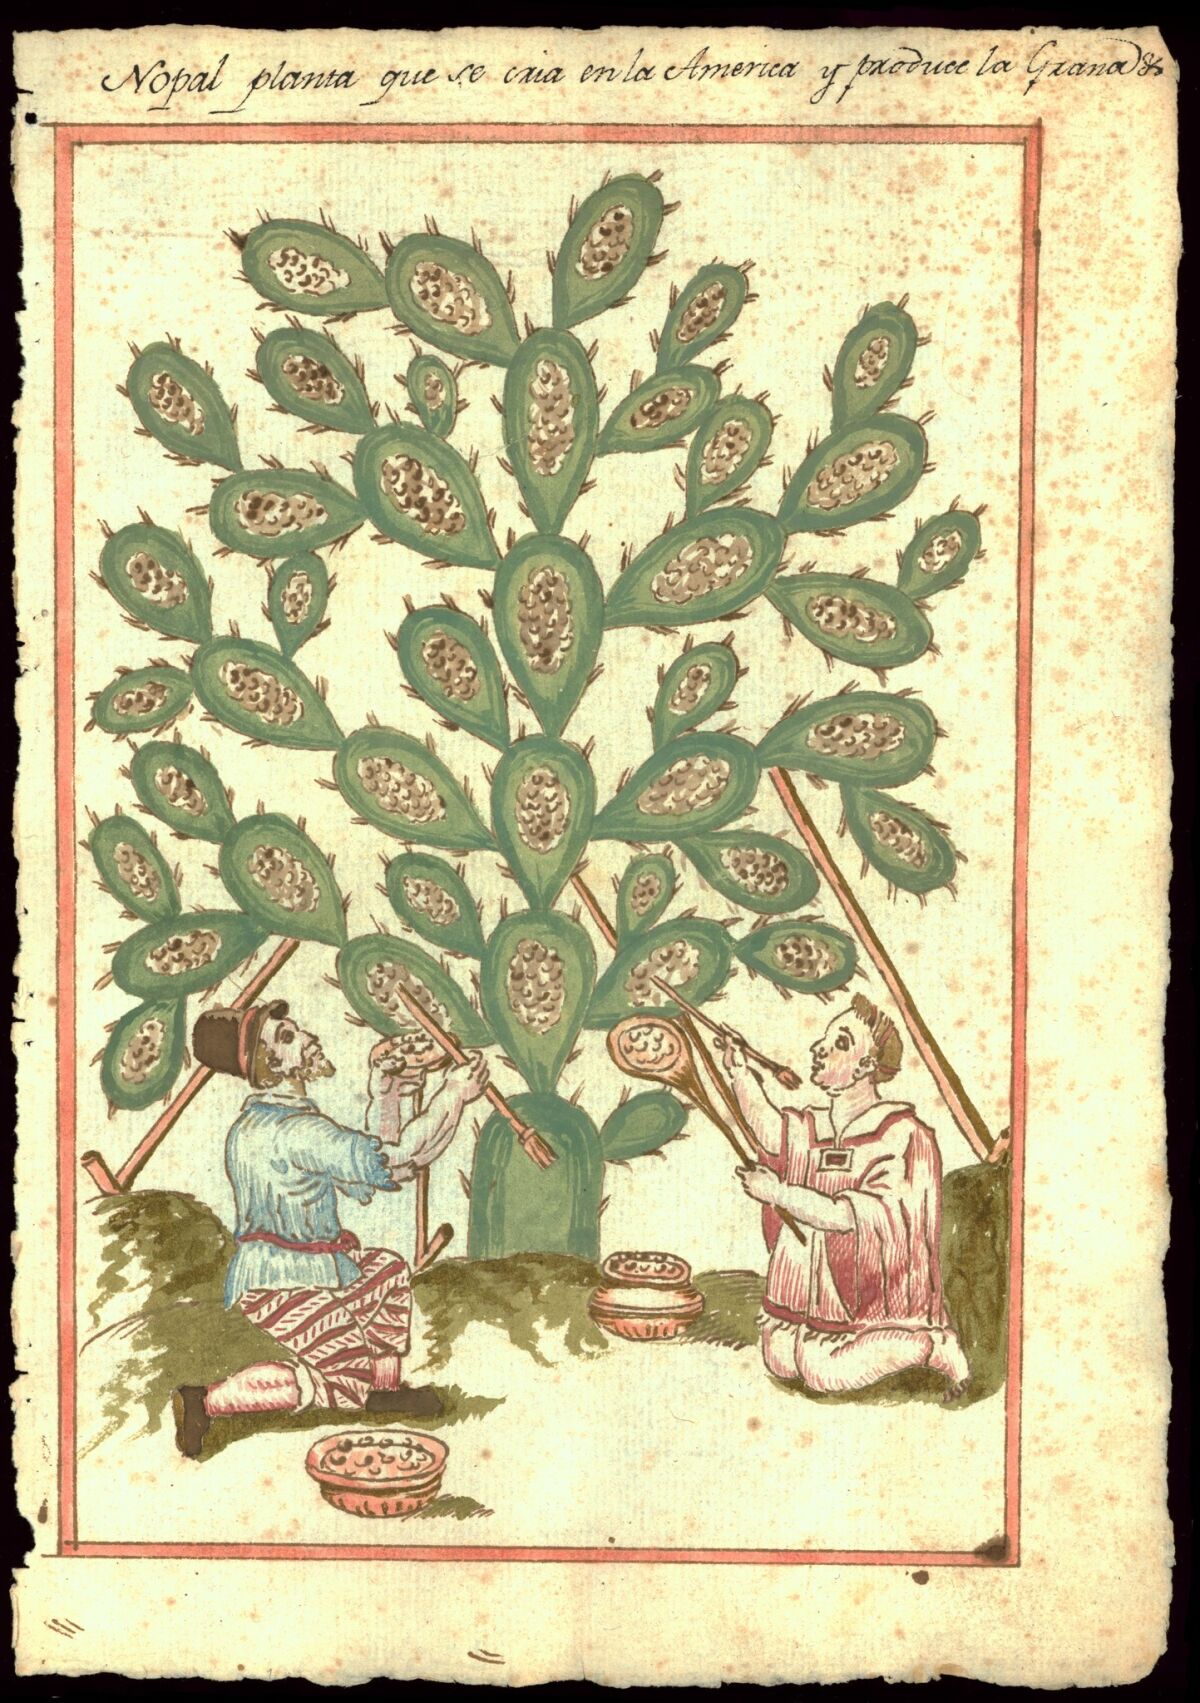 A 17th century depiction of a nopal from a book — part of "Visual Voyages," on view at the Huntington.